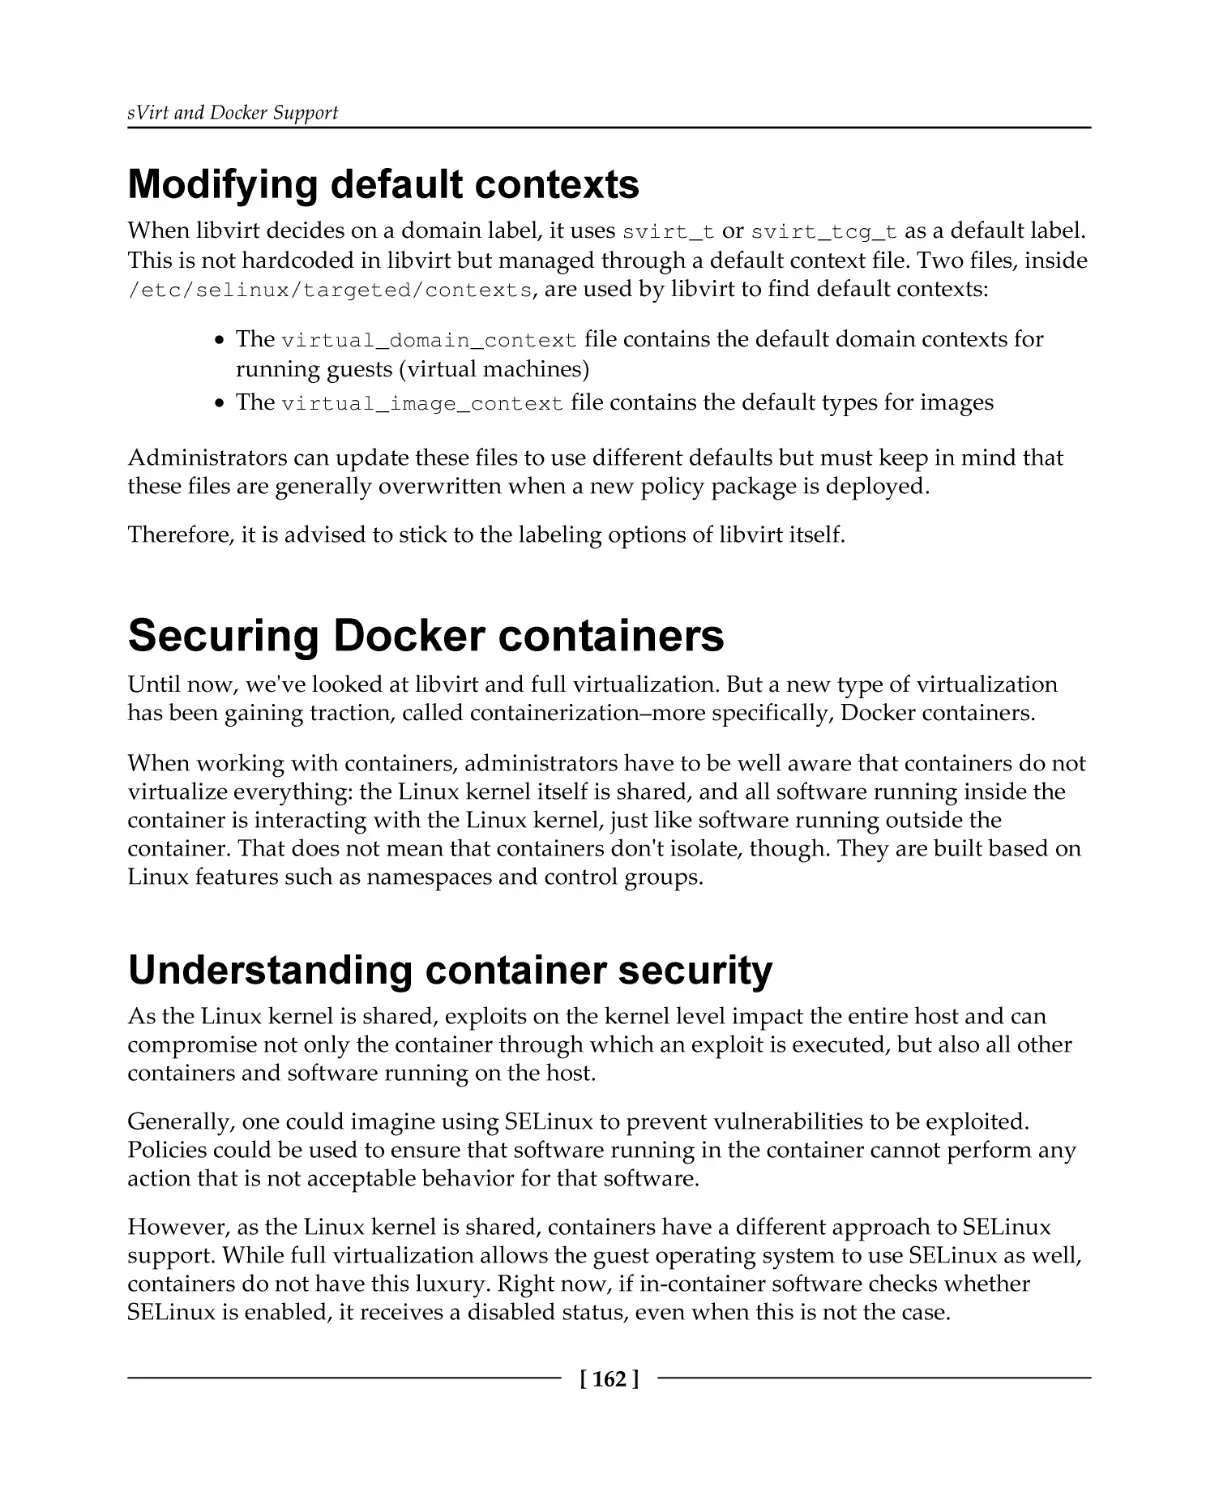 Modifying default contexts
Securing Docker containers
Understanding container security